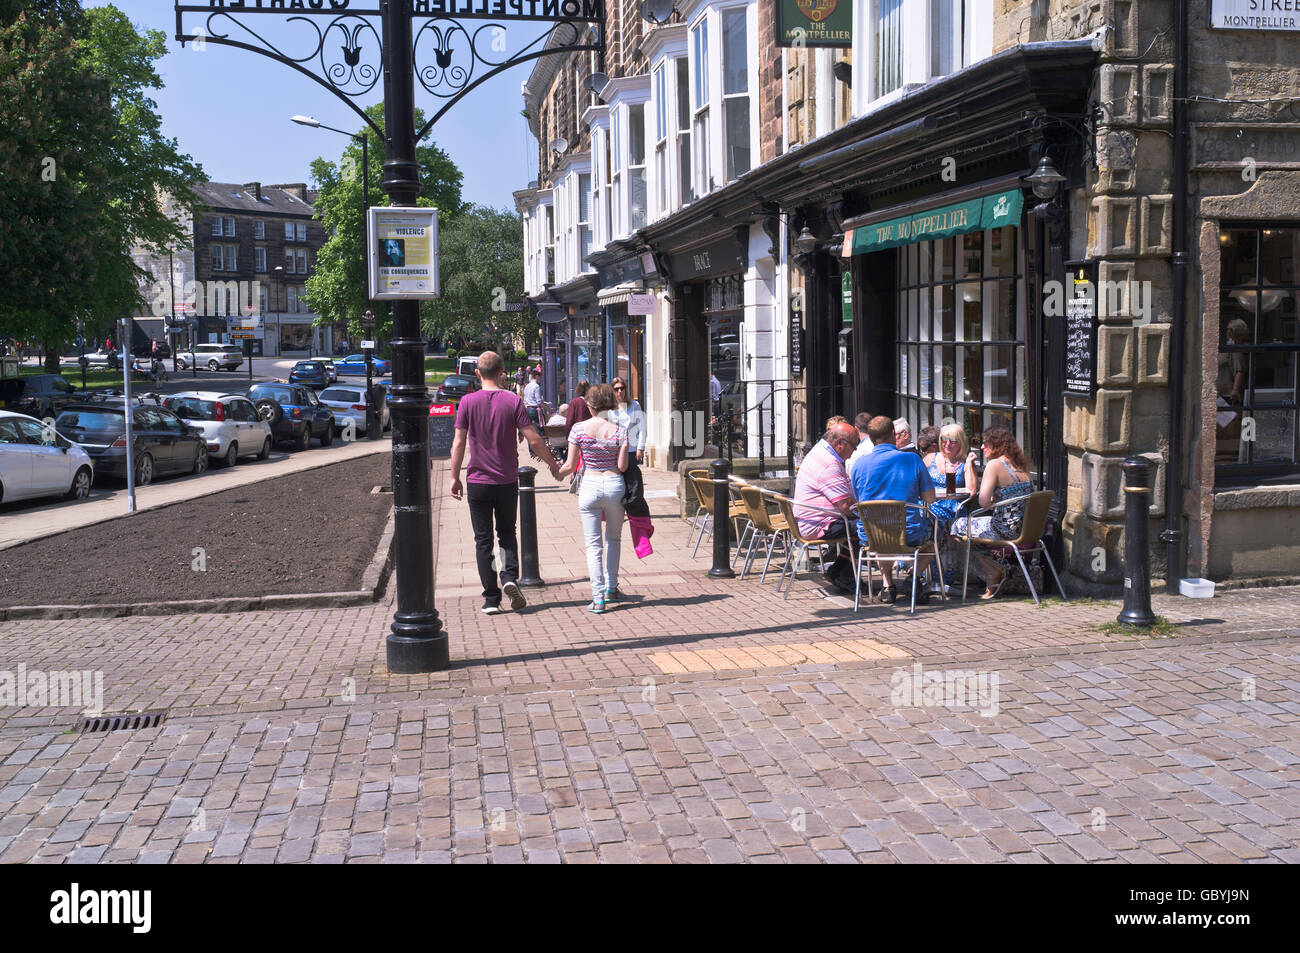 dh  HARROGATE NORTH YORKSHIRE People sitting outside street cafe drinking in sunshine montpellier summer uk streets outdoor dining outdoors Stock Photo